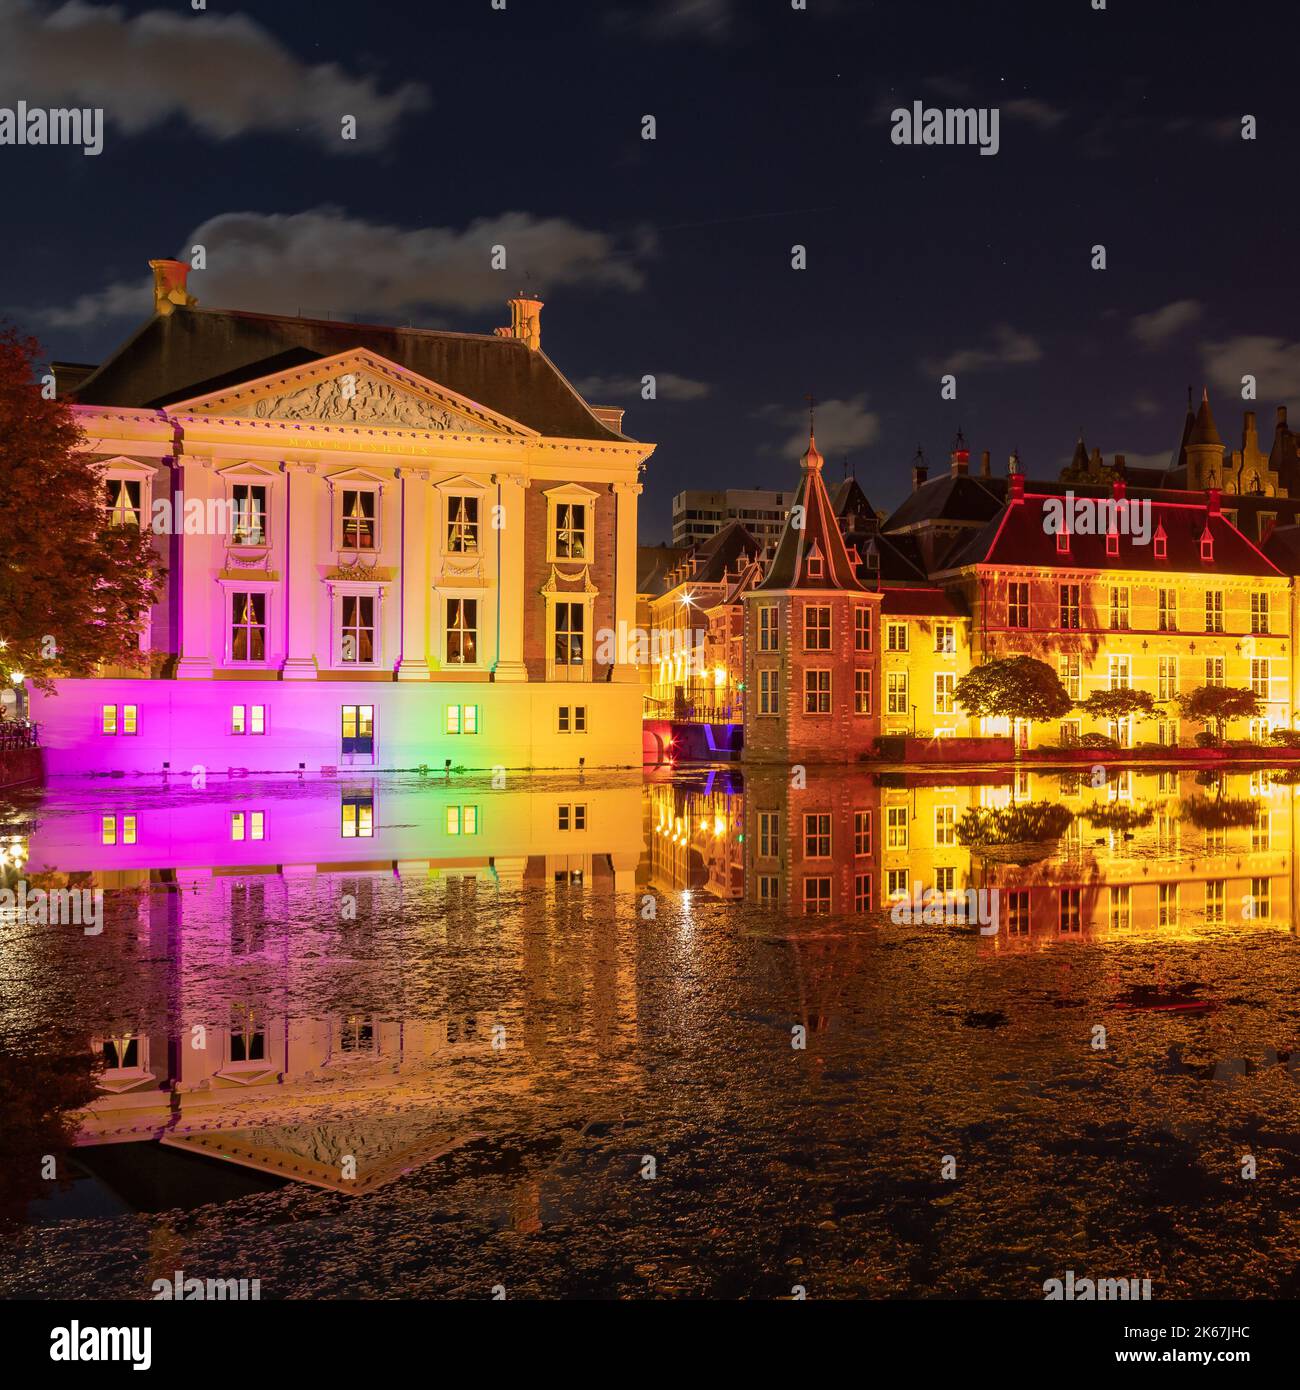 The Mauritshuis Museum and Hofvijver at night in the Hague, the Netherlands Stock Photo